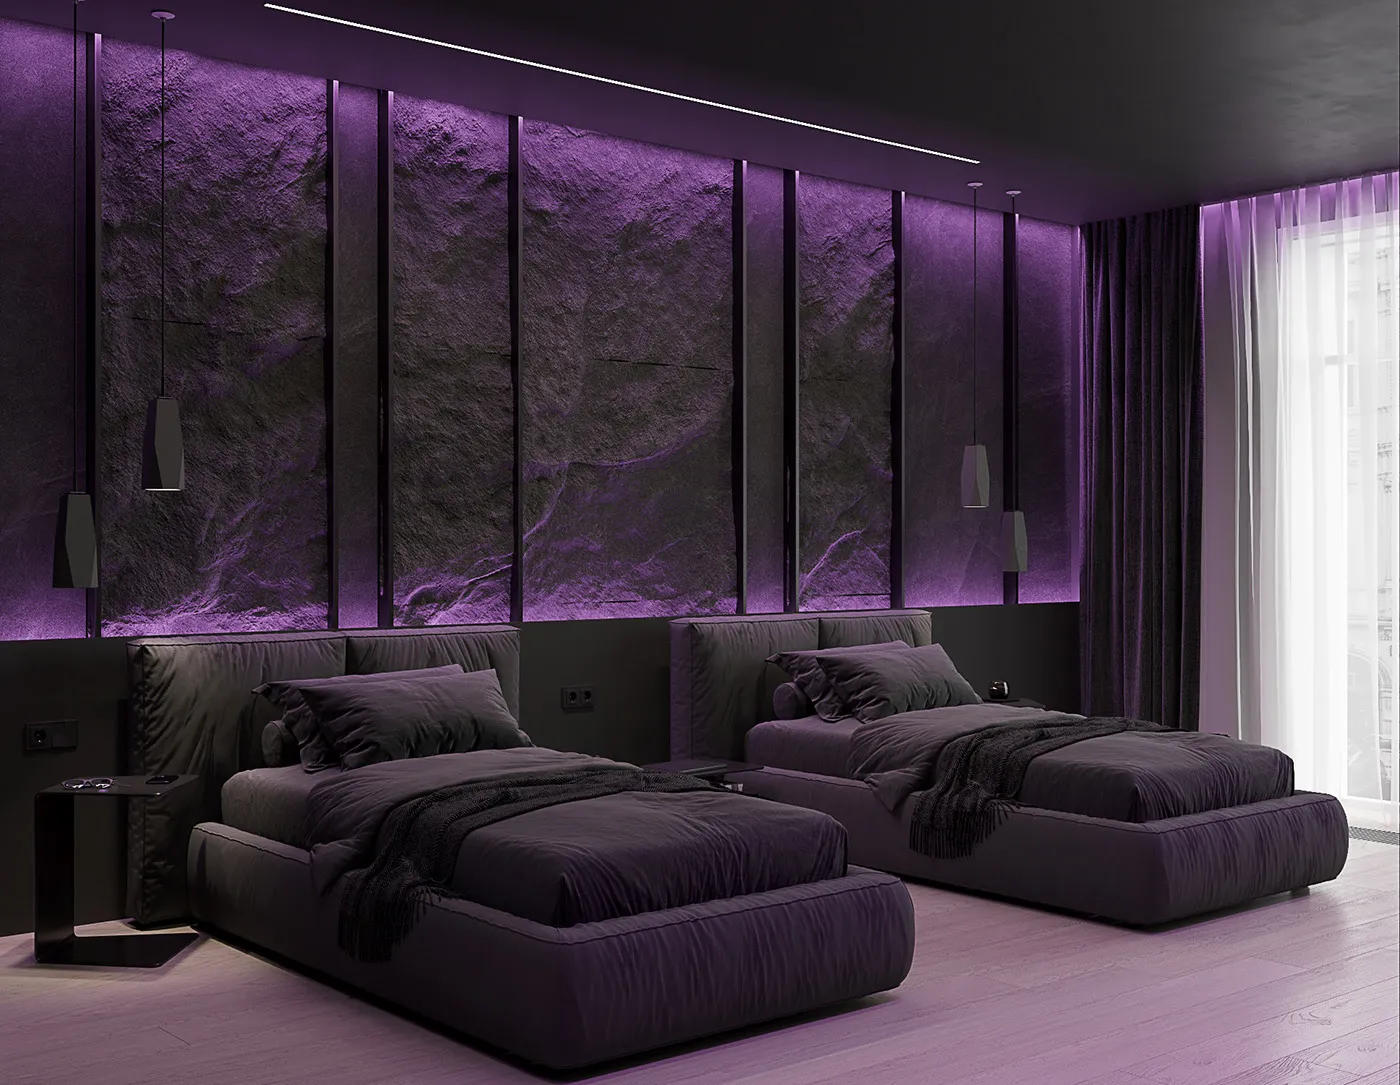 bold black violet room, with a theme, stunning decor, led lights, wallpaper